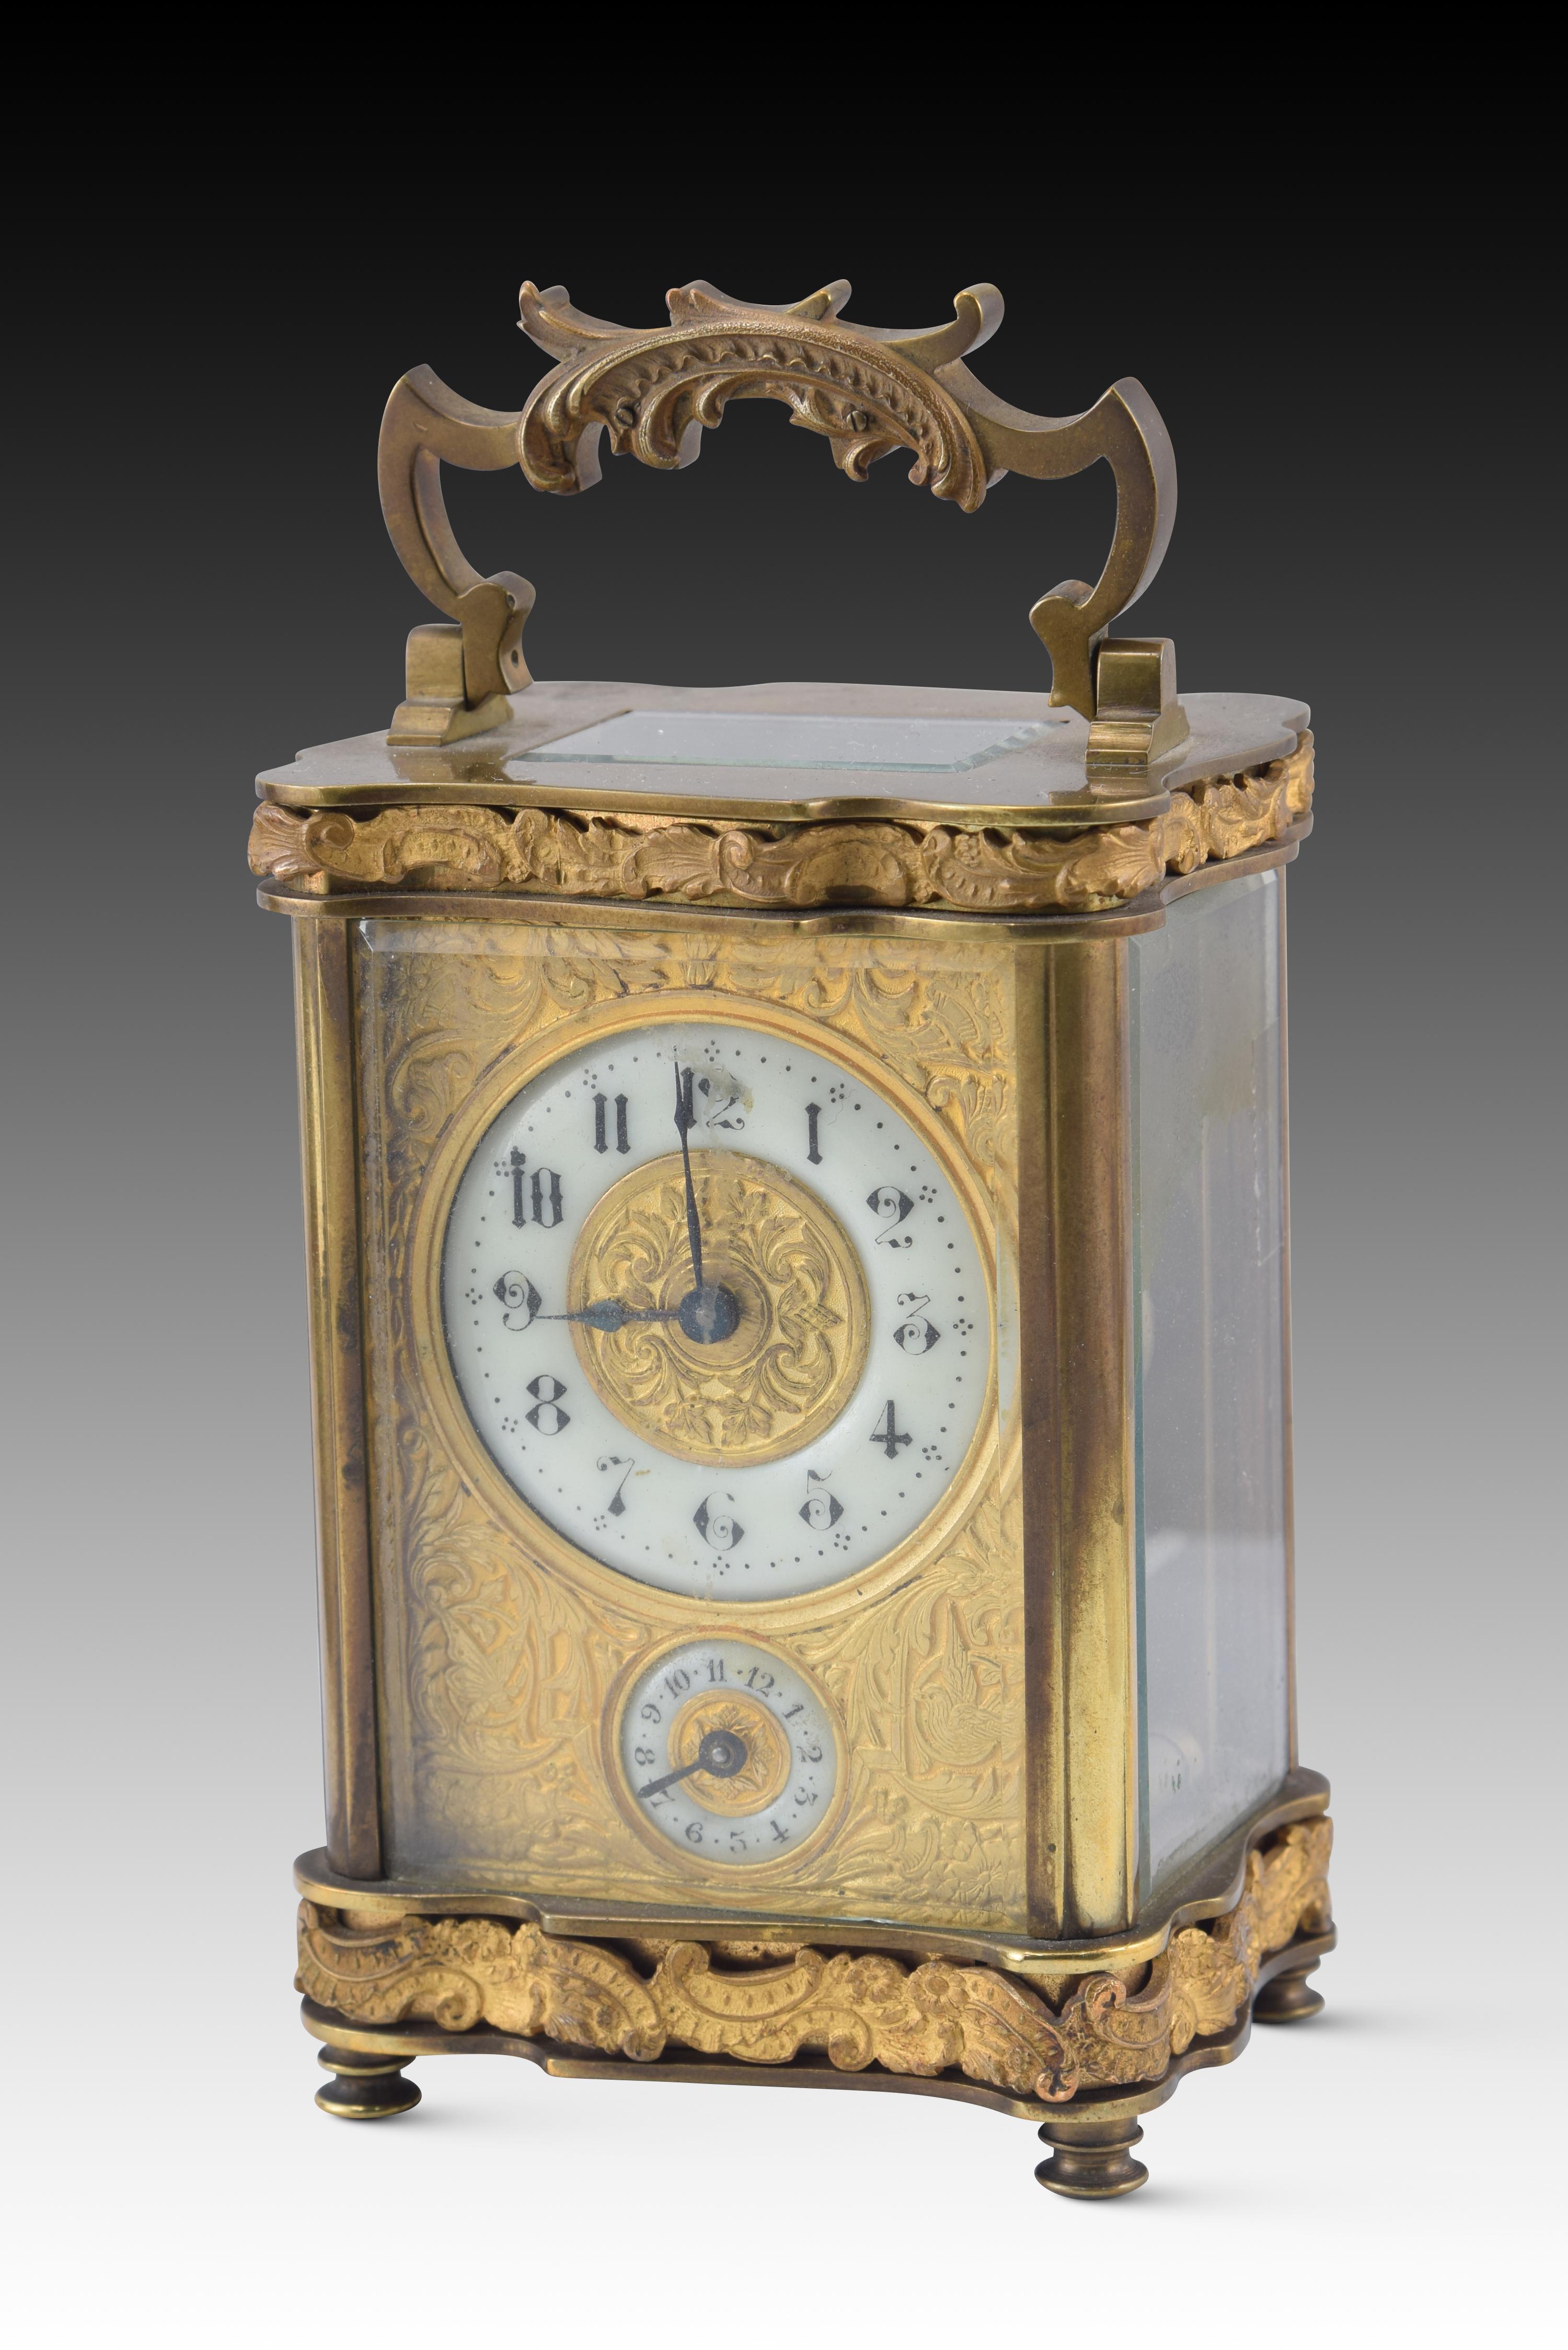 Travel clock with case. Metal, glass, leather, etc. XIX century. 
Case with lid at the top and front with a transparent glass sheet, upholstered on the inside, containing a travel clock with alarm function. It has a handle and decoration in two